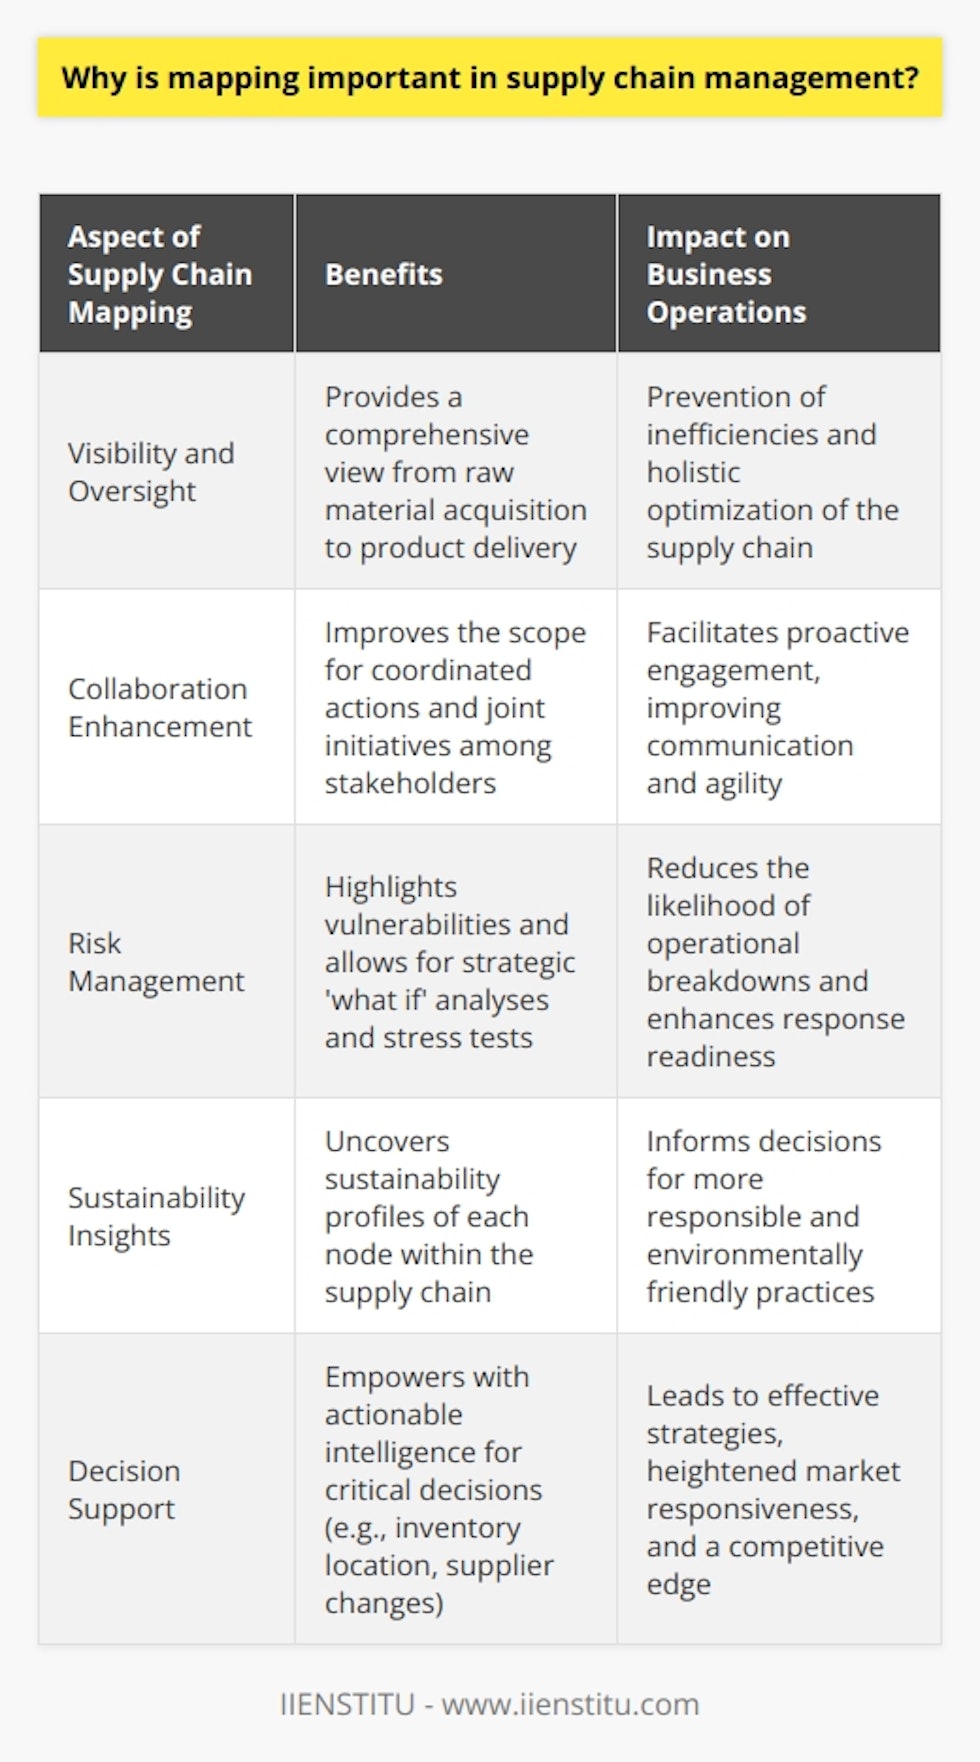 In the modern business landscape, the intricacies of supply chains can be the defining factor between success and failure for organizations. As such, mapping has become an indelible aspect of supply chain management, serving as a visual and analytical tool that delineates the interconnected components of supply chain networks. This granular oversight is not a mere preference but a strategic necessity.The importance of accurate mapping in the supply chain cannot be overstated. It provides a bird's-eye view of the entire spectrum from raw material acquisition to final product delivery, revealing the inner workings and interdependencies that may not be easily perceptible otherwise. This high-level perspective is vital for companies to prevent inefficiencies and optimize their operations holistically.One essential aspect of supply chain mapping is enabling visibility and collaboration. With mapping, each stakeholder can pinpoint how and where their operations fit within the greater scheme. This clarity enhances the scope for coordinated actions and joint initiatives which are vital aspects of agile supply chain management. It brings a shared understanding to the forefront, facilitating proactive engagement and communication across all participants. Furthermore, in a world where business disruptions are not a matter of if but when, the role of mapping in risk management and mitigation is increasingly significant. Supply chain maps can spotlight single points of failure and allow businesses to perform what if analyses and stress tests on their networks. By identifying and preemptively addressing areas of vulnerability, organizations can significantly reduce the likelihood of operational breakdowns and respond swiftly if they occur, sustaining the flow and reliability of supply.Sustainability, another cornerstone of modern business, is also tightly interwoven with mapping. A meticulously charted supply chain can reveal the sustainability profiles of each node—be it carbon footprint, waste generation, energy consumption, or socio-environmental impact. With this knowledge in hand, conscious choices can be made to support not only efficient but also ethically responsible and environmentally friendly practices.Lastly, supply chain mapping sharpens decision-making. It literally maps out the points along the chain where impactful decisions can be made. Whether it's relocating inventory, changing transportation modes, or switching suppliers, mapping provides the actionable intelligence required to make well-informed decisions. Consequently, this leads to effectively designed strategies that can enhance market responsiveness, drive down costs, and ultimately offer a substantial competitive edge.In sum, mapping is not merely about having a diagrammatic representation of the supply chain—it's about using that representation to steer and propel a company’s strategic vision. It touches on every part of the operation and exemplifies the proactive, data-driven approach that typifies effective supply chain management. Thus, organizations that invest in accurate supply chain mapping position themselves to navigate the complexities of global commerce with confidence, agility, and foresight.